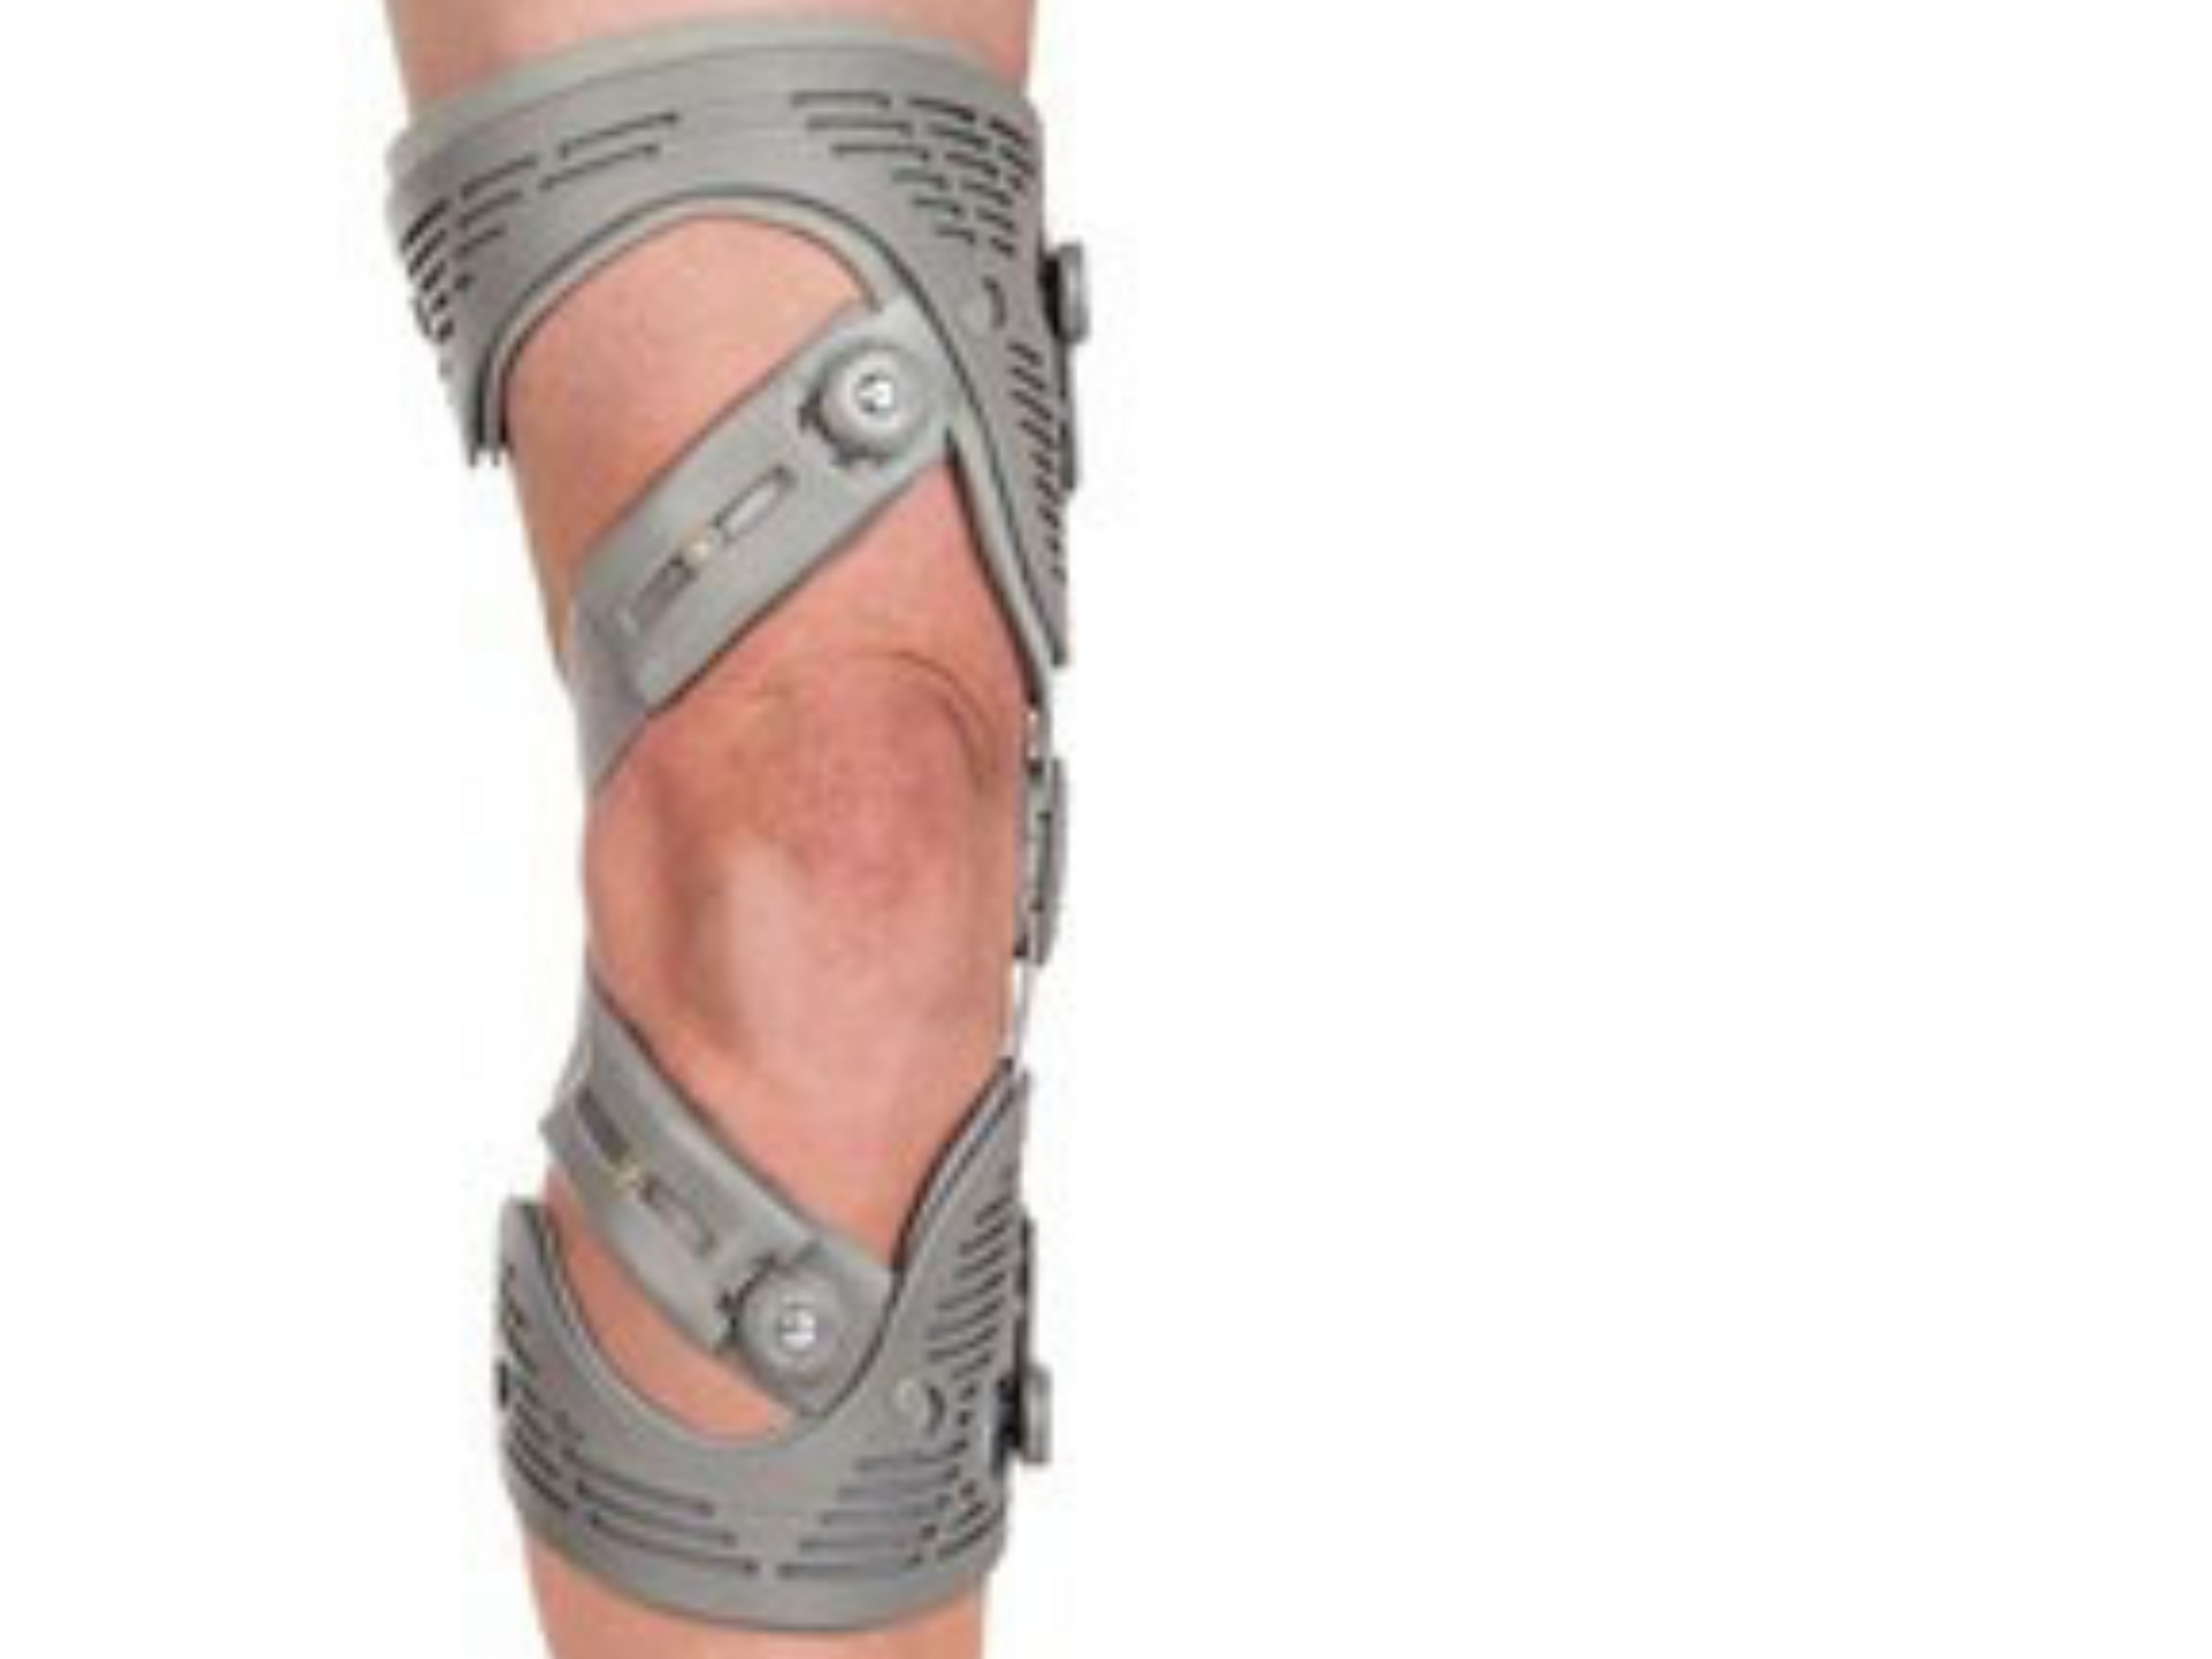 An offloader brace is designed to reduce the pressure on the injured part of your knee.